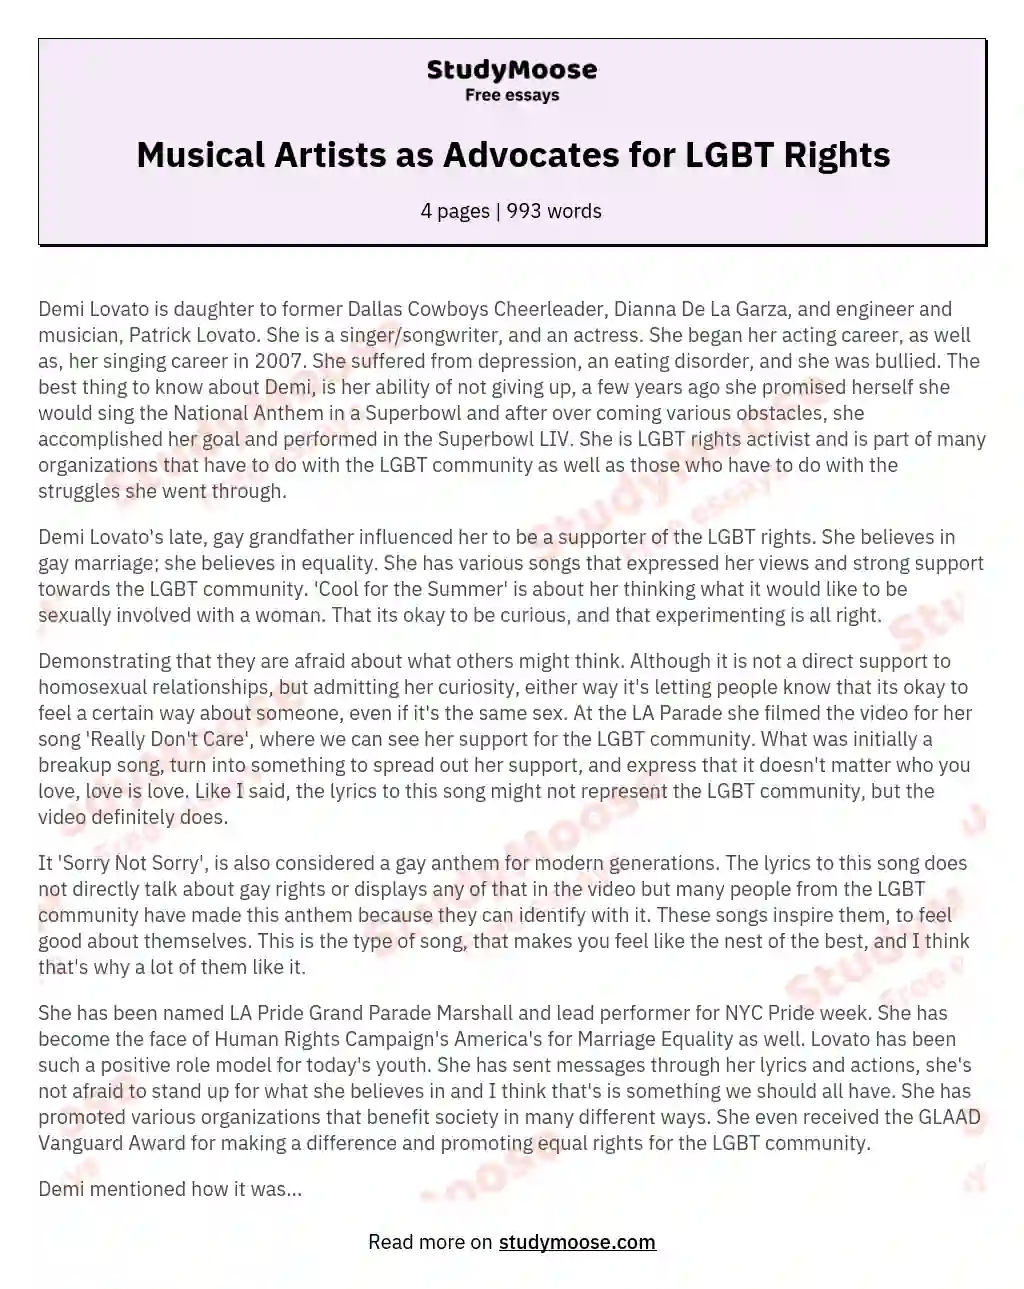 Musical Artists as Advocates for LGBT Rights essay